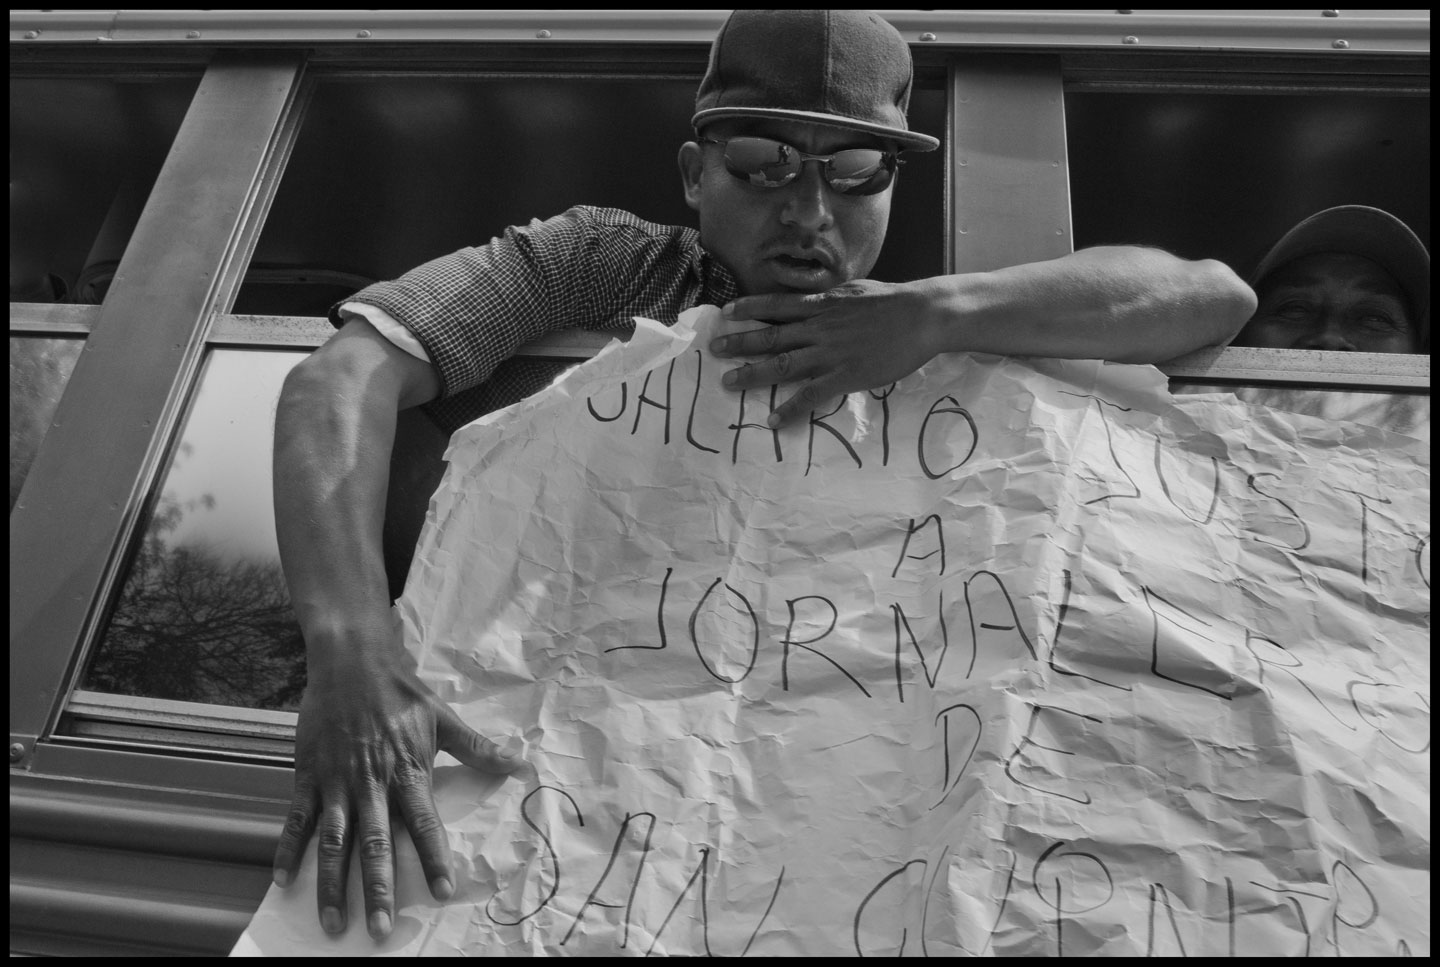 A striking farm worker on a bus from the San Quintin Valley holds a sign demanding: A Fair Wage for Farm Workers in San Quintin.